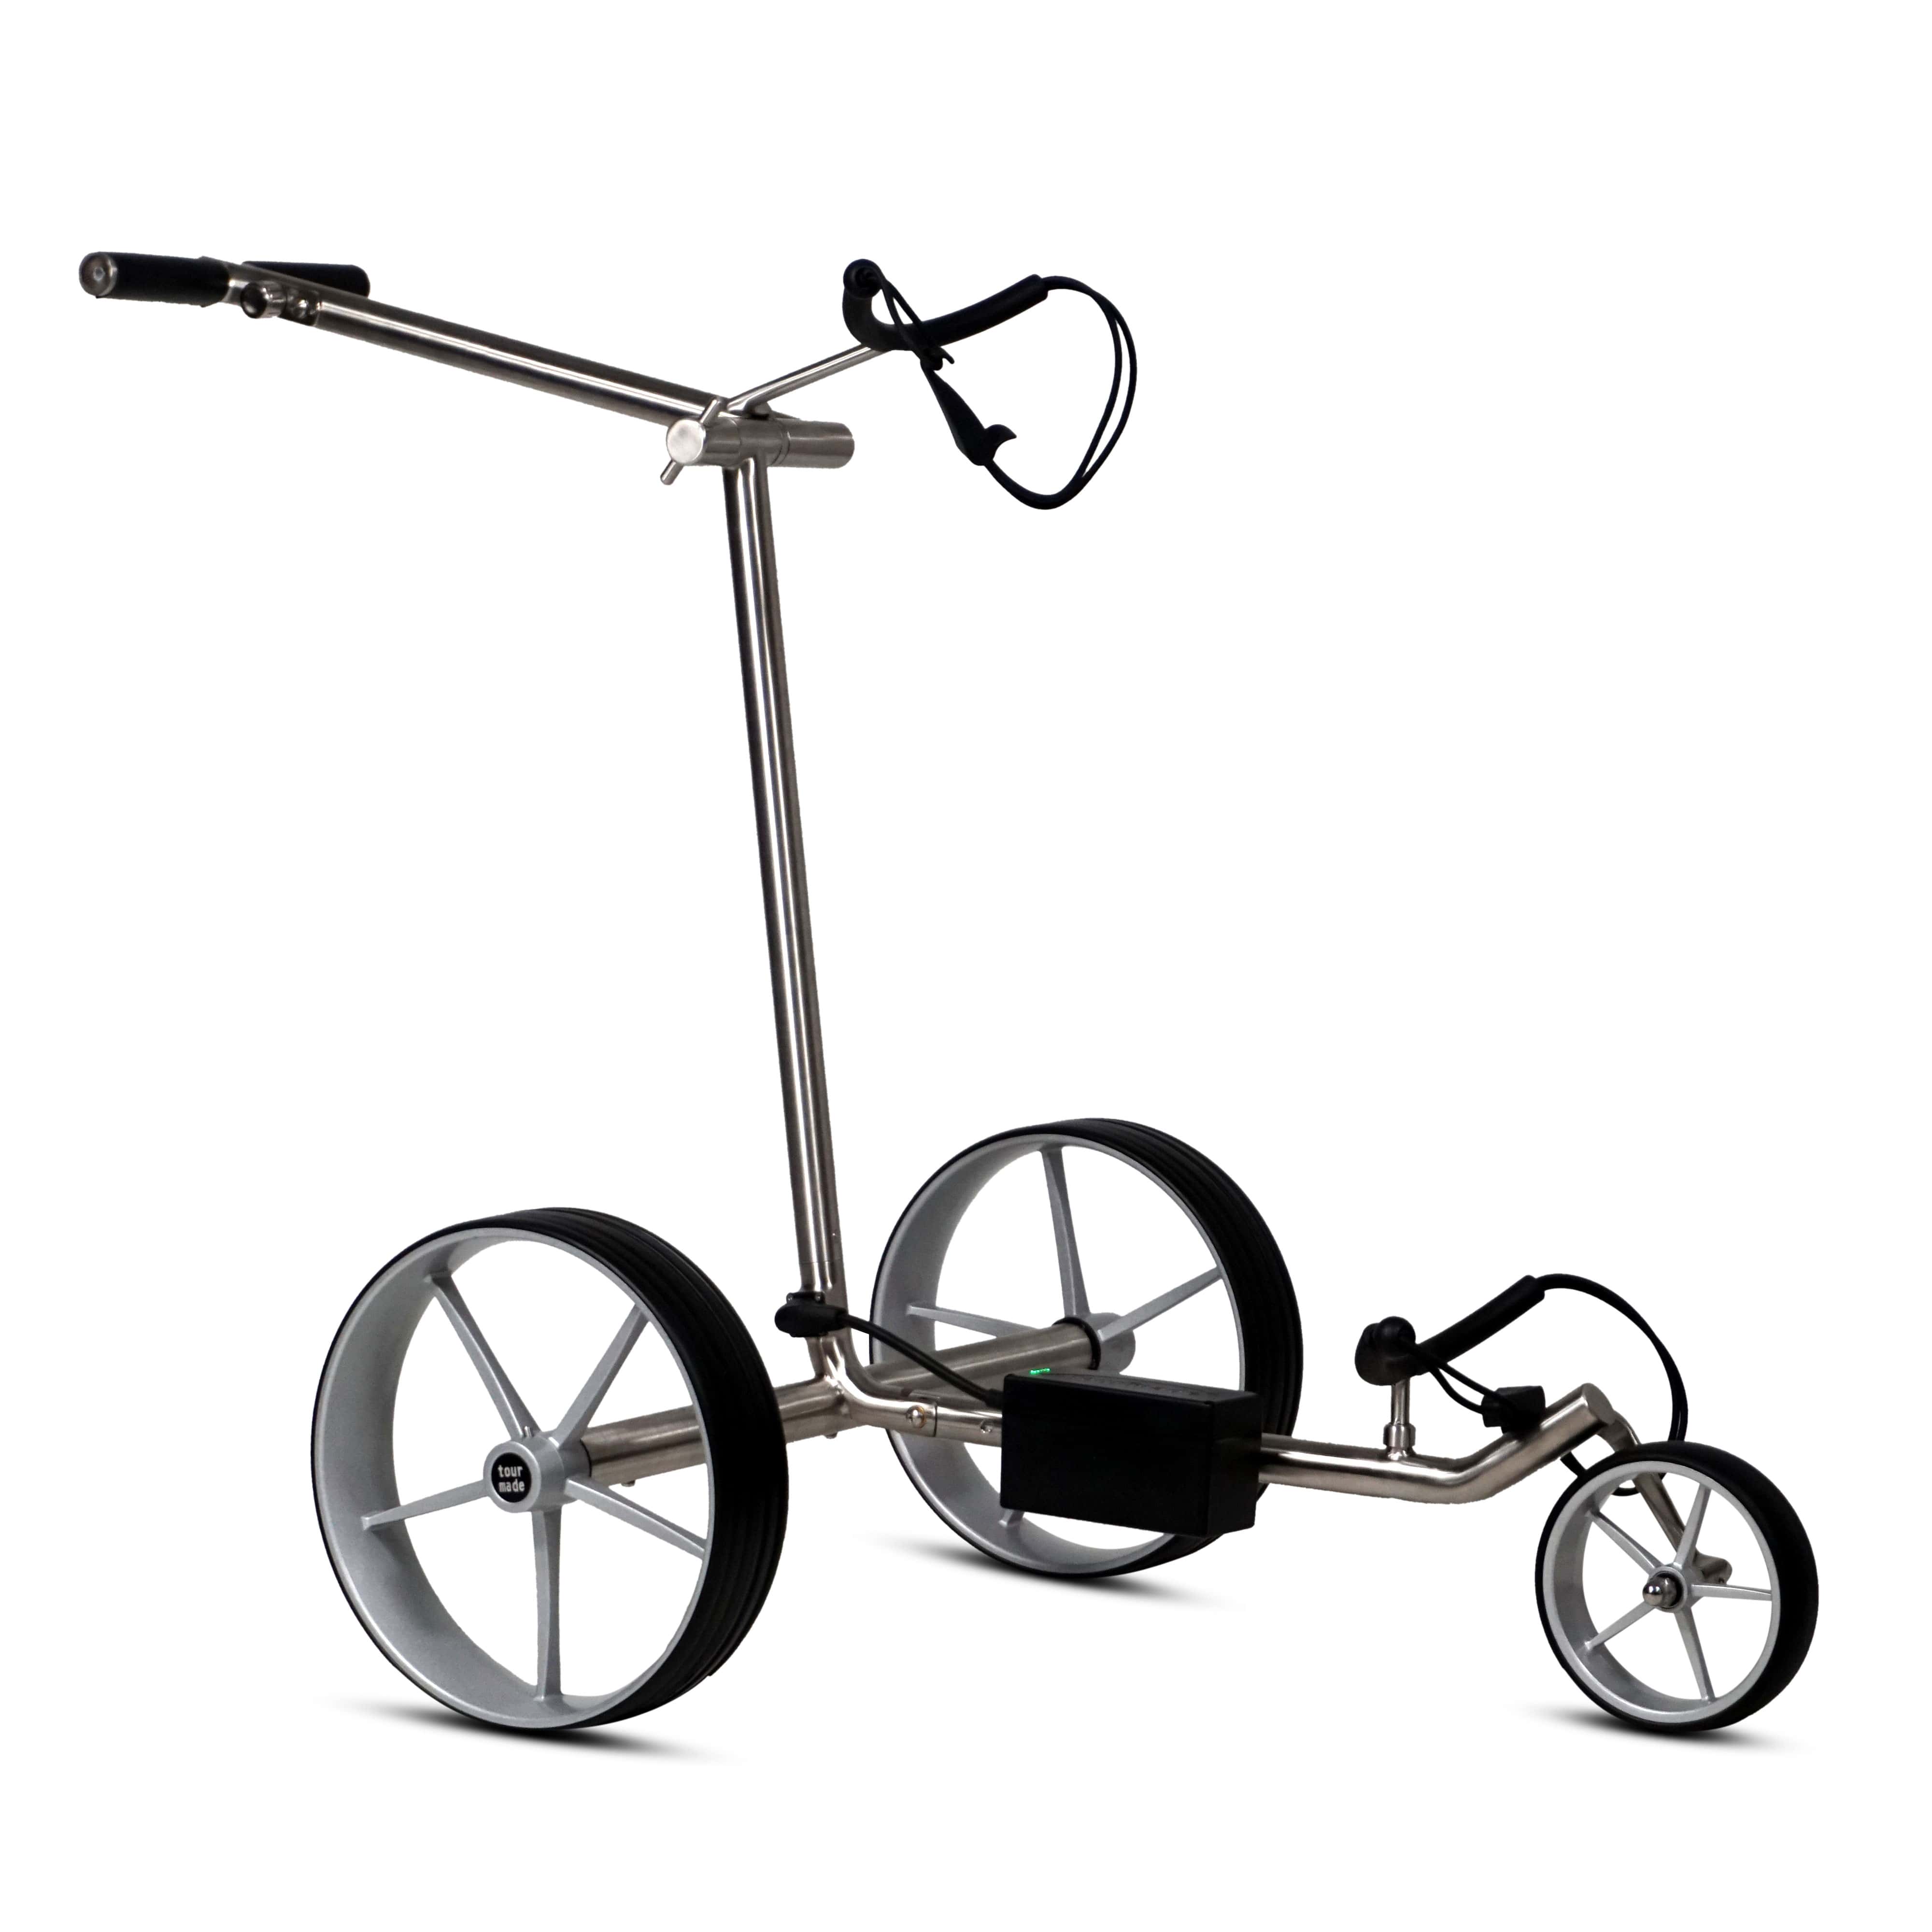 Tour Made Haicaddy® HC9 electric golf trolley brushed frame